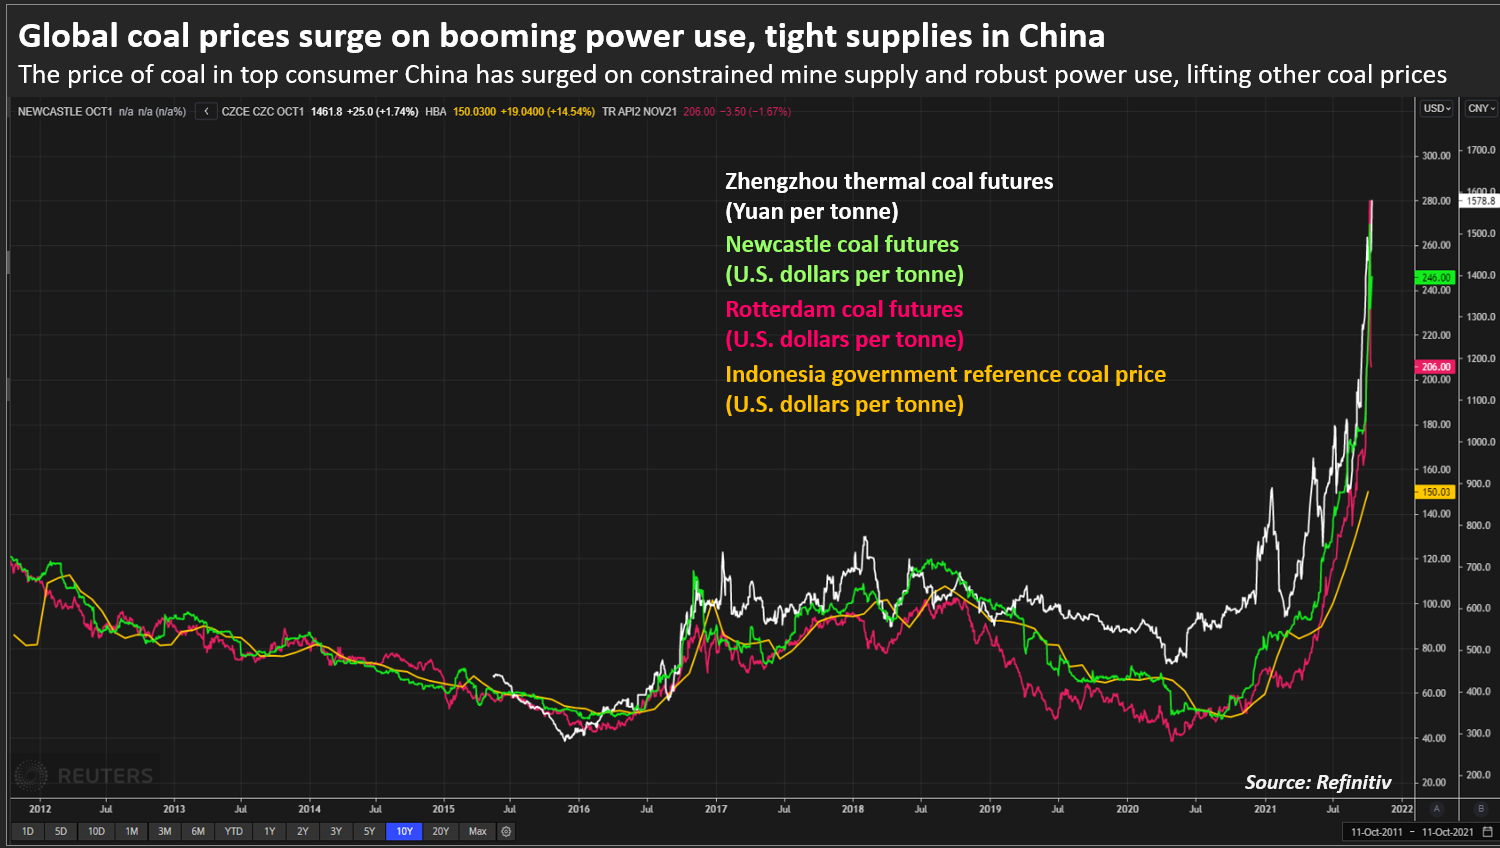 Global coal prices surge on booming power use, tight supplies in China